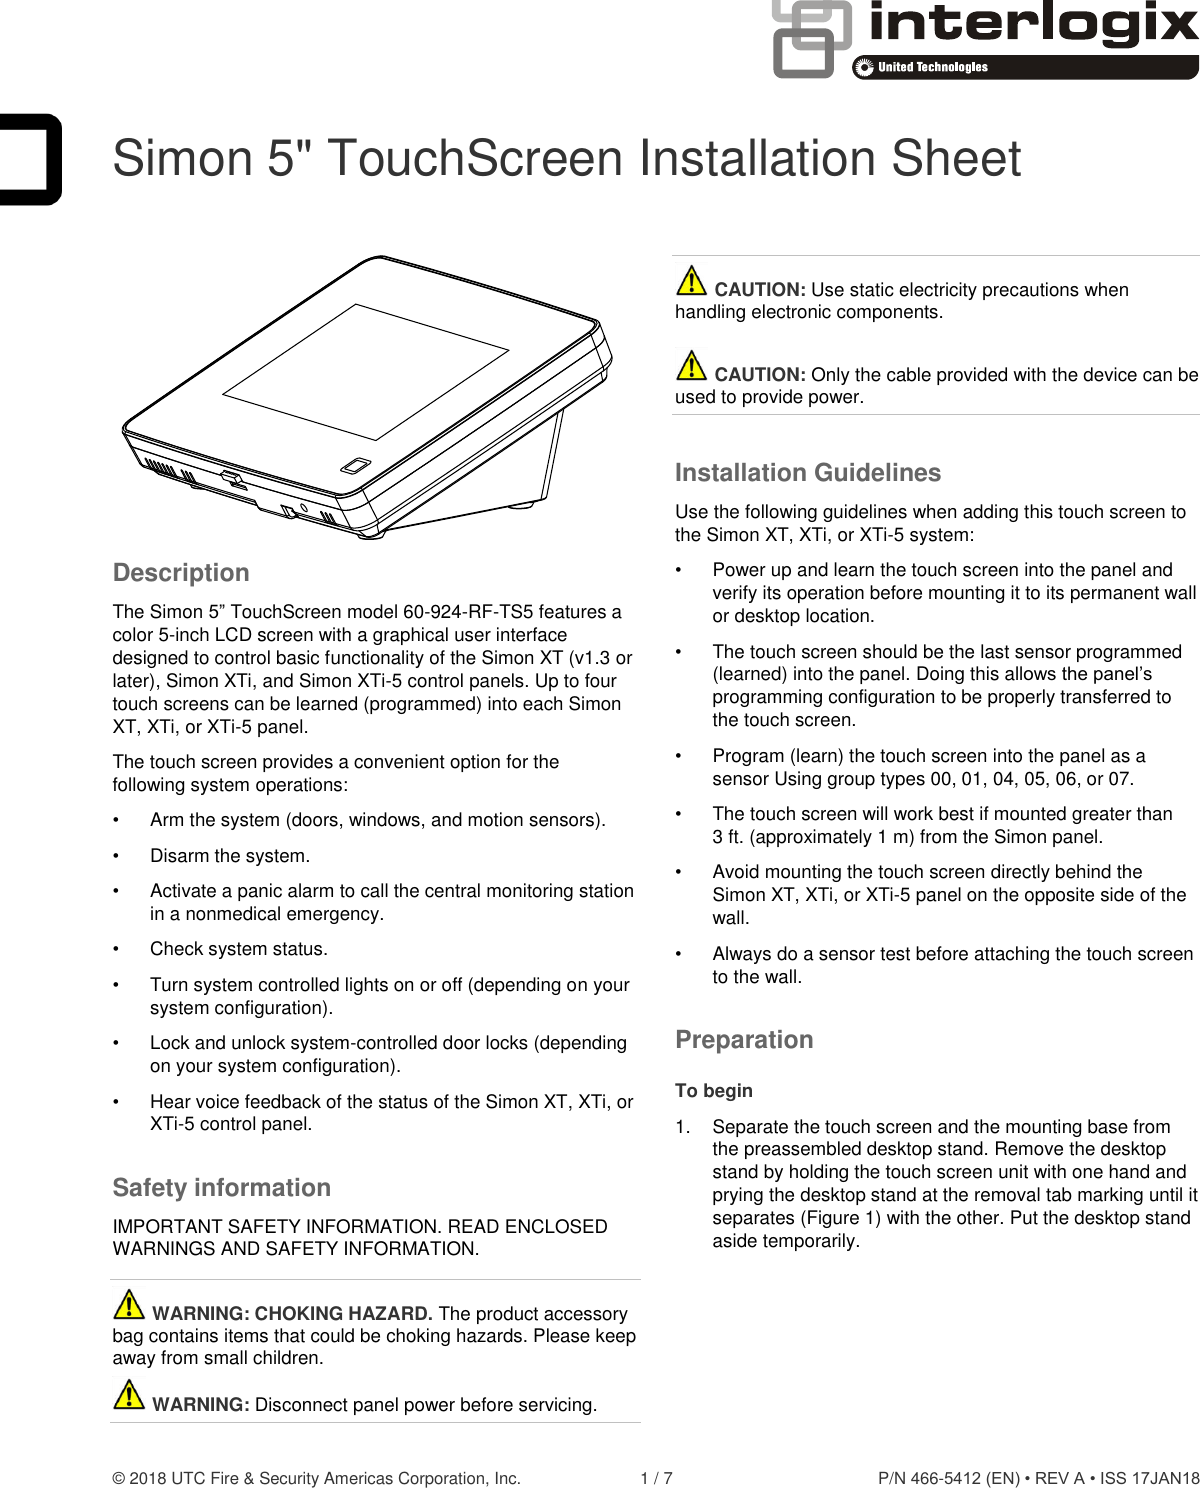  © 2018 UTC Fire &amp; Security Americas Corporation, Inc.  1 / 7  P/N 466-5412 (EN) • REV A • ISS 17JAN18  Simon 5&quot; TouchScreen Installation Sheet  Description The Simon 5” TouchScreen model 60-924-RF-TS5 features a color 5-inch LCD screen with a graphical user interface designed to control basic functionality of the Simon XT (v1.3 or later), Simon XTi, and Simon XTi-5 control panels. Up to four touch screens can be learned (programmed) into each Simon XT, XTi, or XTi-5 panel. The touch screen provides a convenient option for the following system operations: •  Arm the system (doors, windows, and motion sensors). •  Disarm the system. •  Activate a panic alarm to call the central monitoring station in a nonmedical emergency. •  Check system status. •  Turn system controlled lights on or off (depending on your system configuration). •  Lock and unlock system-controlled door locks (depending on your system configuration). •  Hear voice feedback of the status of the Simon XT, XTi, or XTi-5 control panel. Safety information IMPORTANT SAFETY INFORMATION. READ ENCLOSED WARNINGS AND SAFETY INFORMATION.  WARNING: CHOKING HAZARD. The product accessory bag contains items that could be choking hazards. Please keep away from small children.   WARNING: Disconnect panel power before servicing.   CAUTION: Use static electricity precautions when handling electronic components.   CAUTION: Only the cable provided with the device can be used to provide power. Installation Guidelines Use the following guidelines when adding this touch screen to the Simon XT, XTi, or XTi-5 system: •  Power up and learn the touch screen into the panel and verify its operation before mounting it to its permanent wall or desktop location. •  The touch screen should be the last sensor programmed (learned) into the panel. Doing this allows the panel’s programming configuration to be properly transferred to the touch screen. •  Program (learn) the touch screen into the panel as a sensor Using group types 00, 01, 04, 05, 06, or 07. •  The touch screen will work best if mounted greater than 3 ft. (approximately 1 m) from the Simon panel.  •  Avoid mounting the touch screen directly behind the Simon XT, XTi, or XTi-5 panel on the opposite side of the wall.  •  Always do a sensor test before attaching the touch screen to the wall. Preparation To begin 1.  Separate the touch screen and the mounting base from the preassembled desktop stand. Remove the desktop stand by holding the touch screen unit with one hand and prying the desktop stand at the removal tab marking until it separates (Figure 1) with the other. Put the desktop stand aside temporarily.  